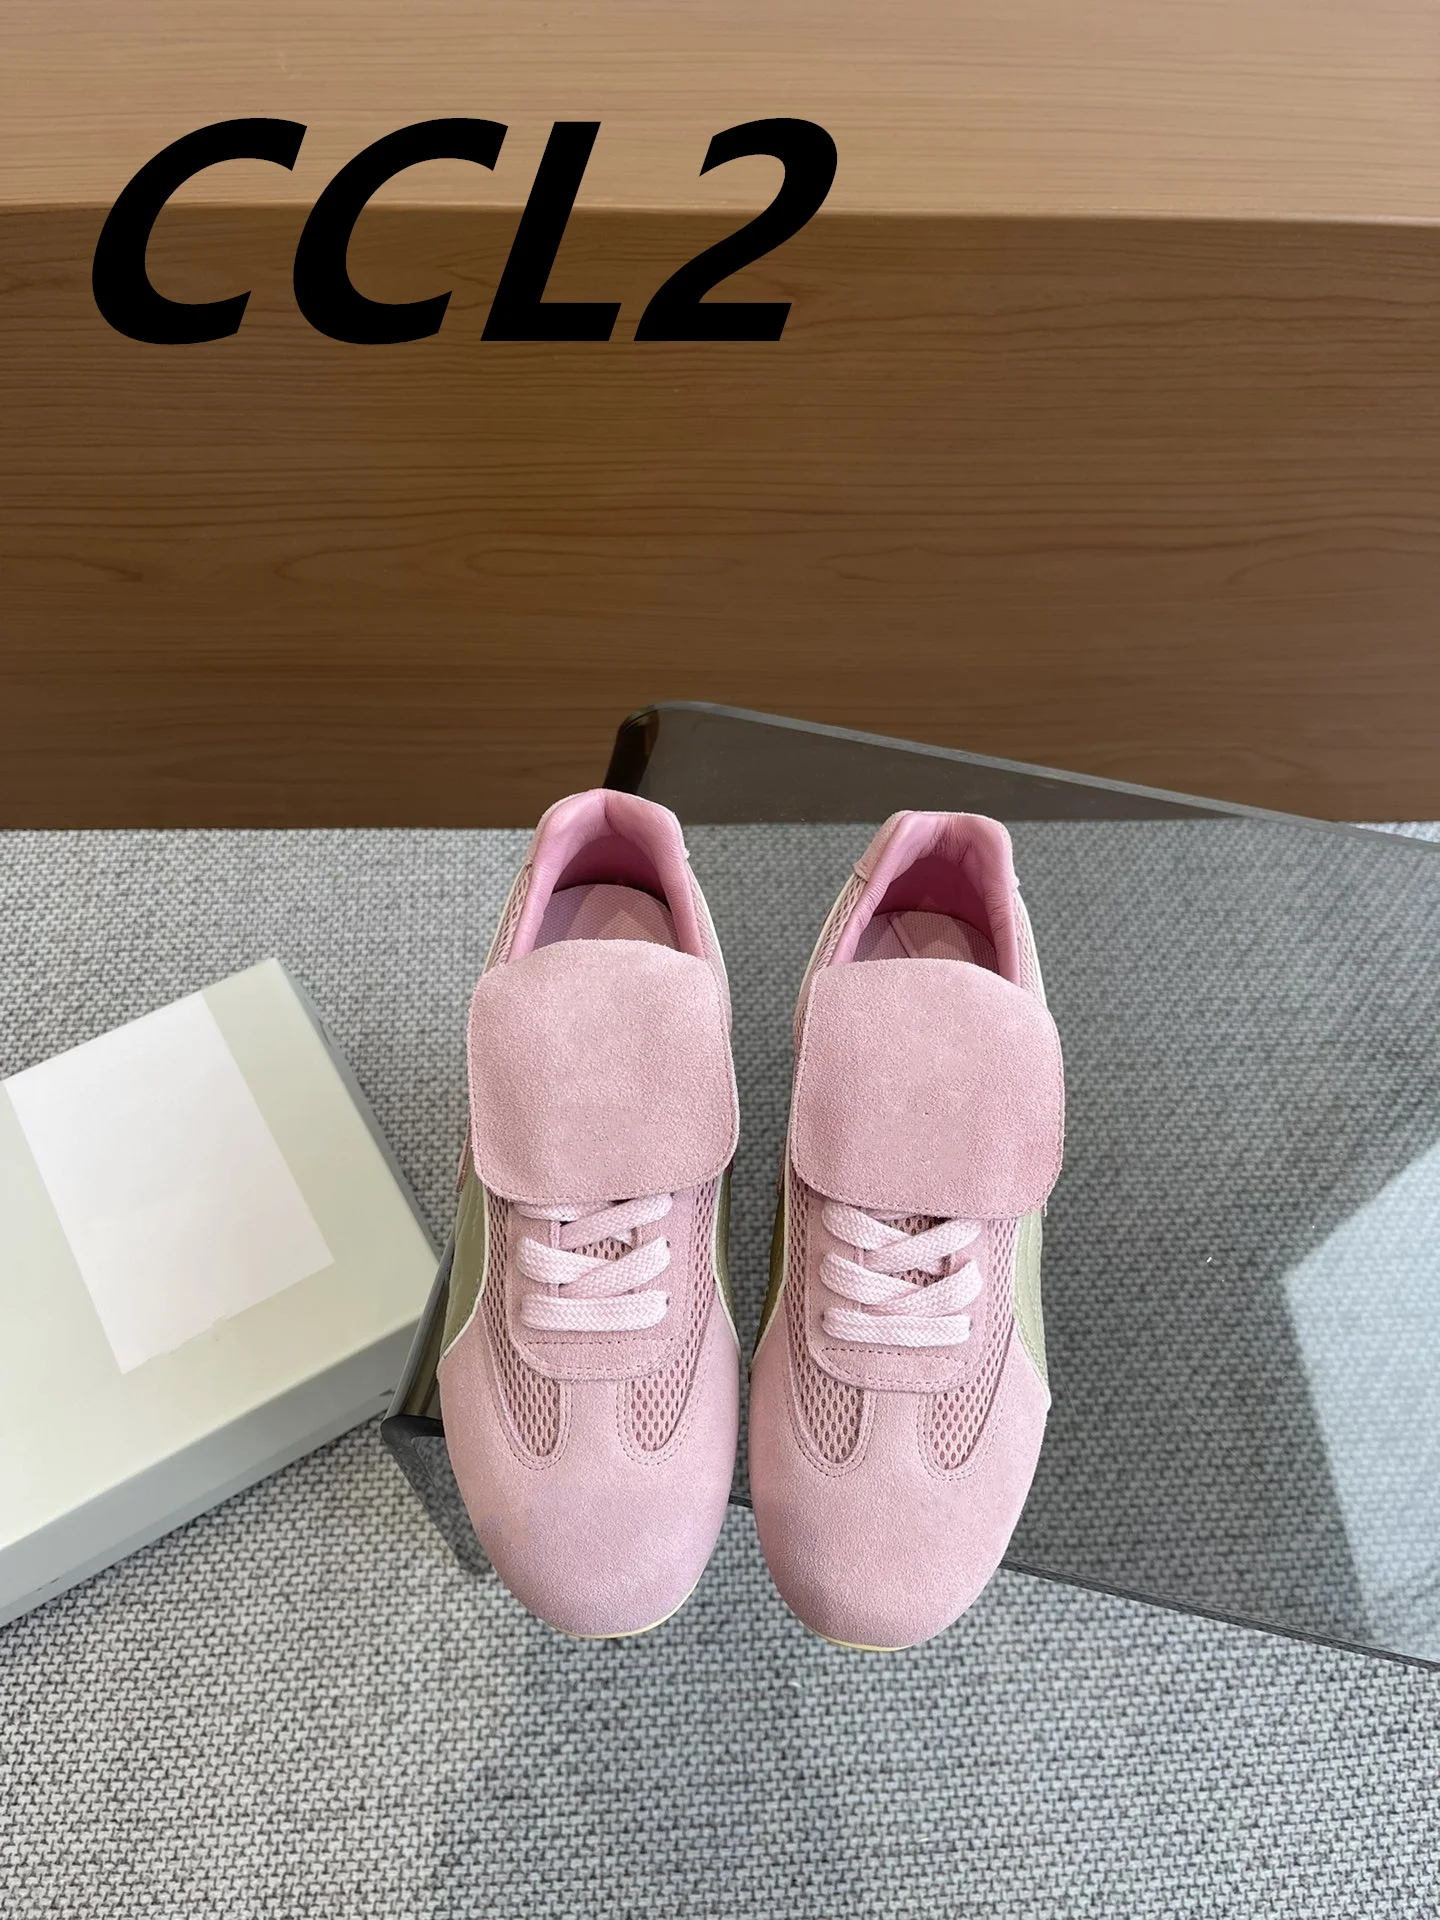 

24 years spring and summer fashion new casual shoes, ladies sneakers, cowhide upper, sheepskin lining, size35-40